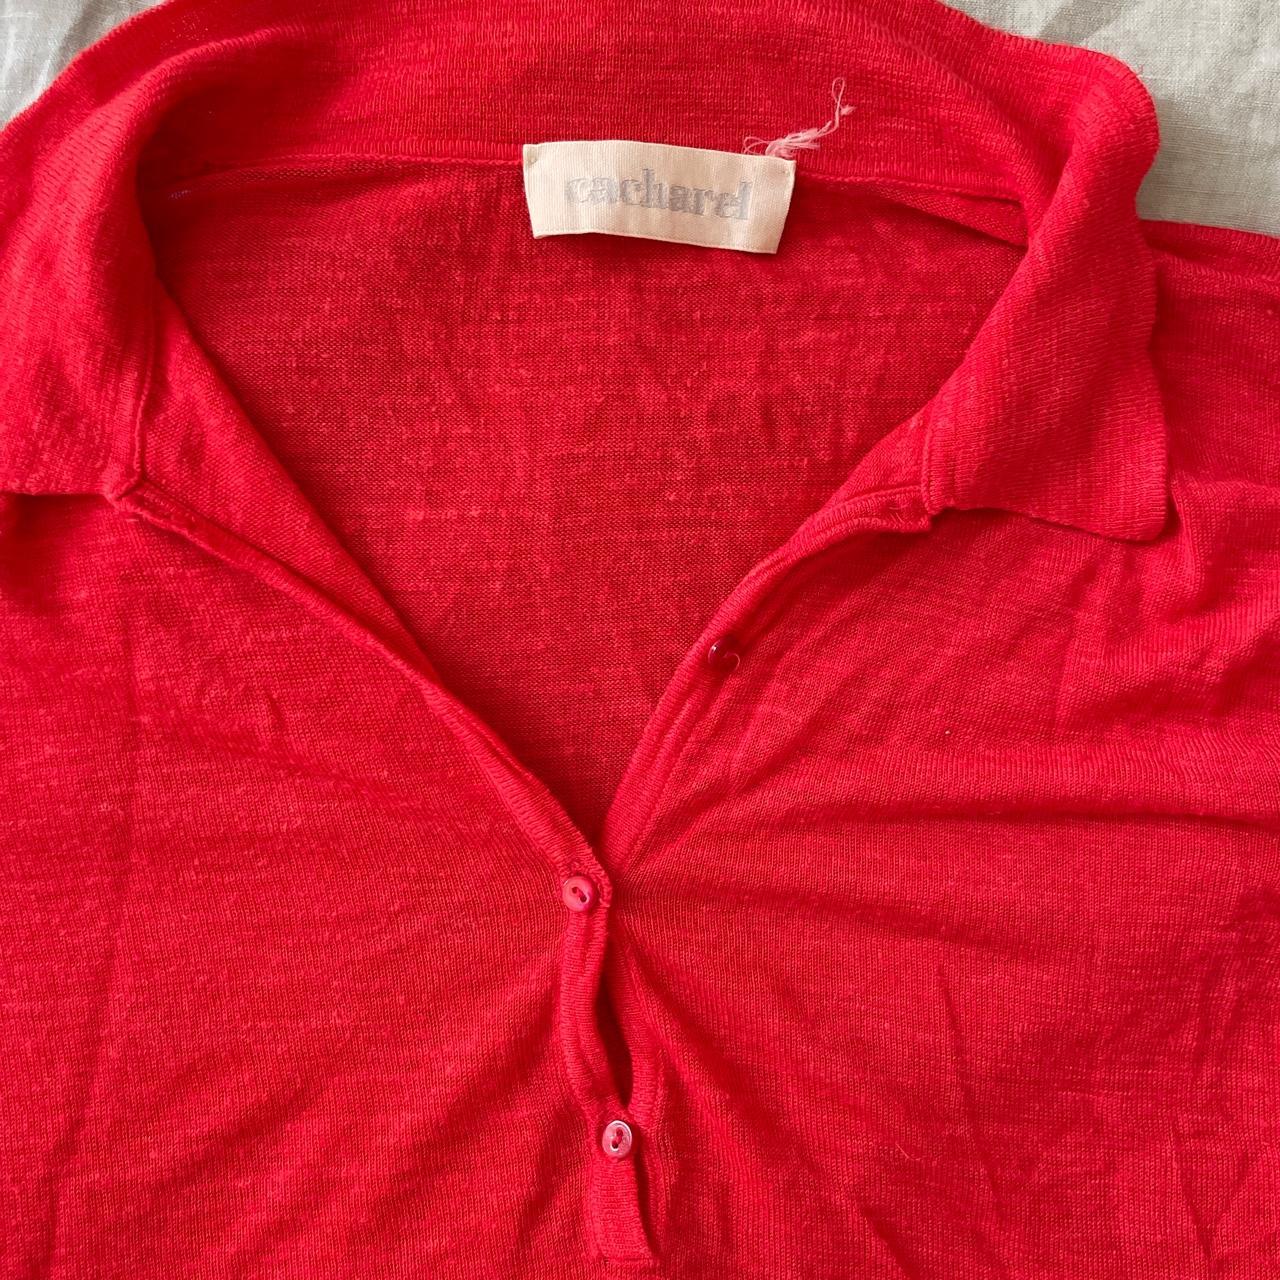 Cacharel Women's Red Blouse